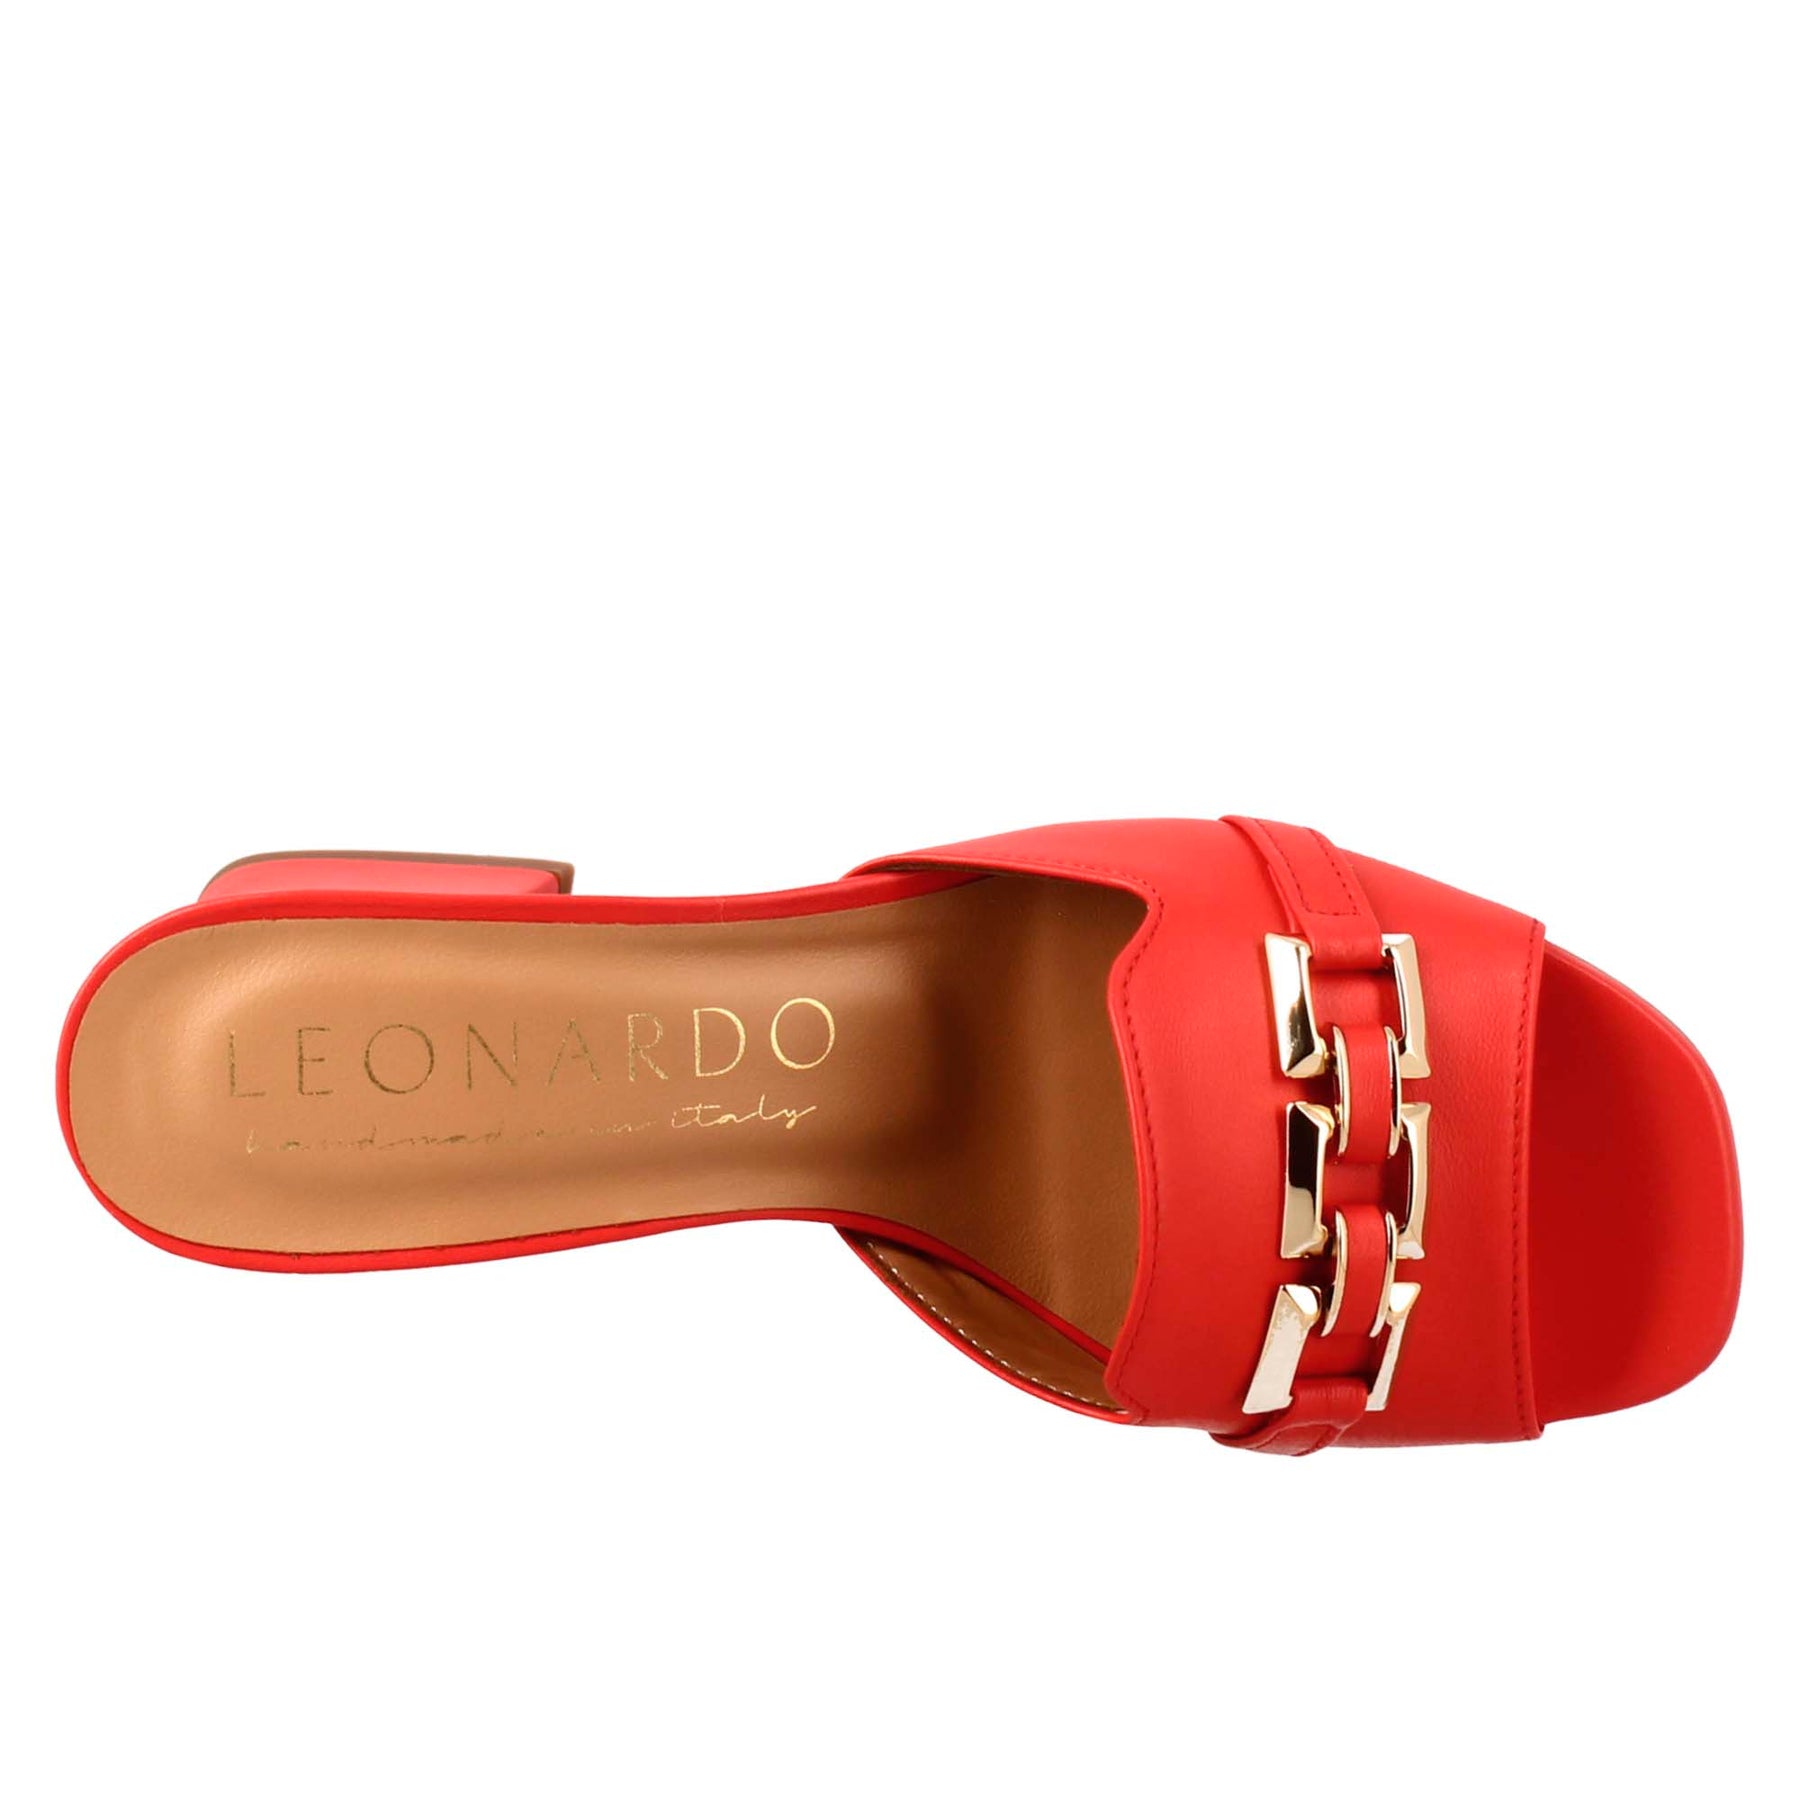 Open sandal with buckle for woman in red leather